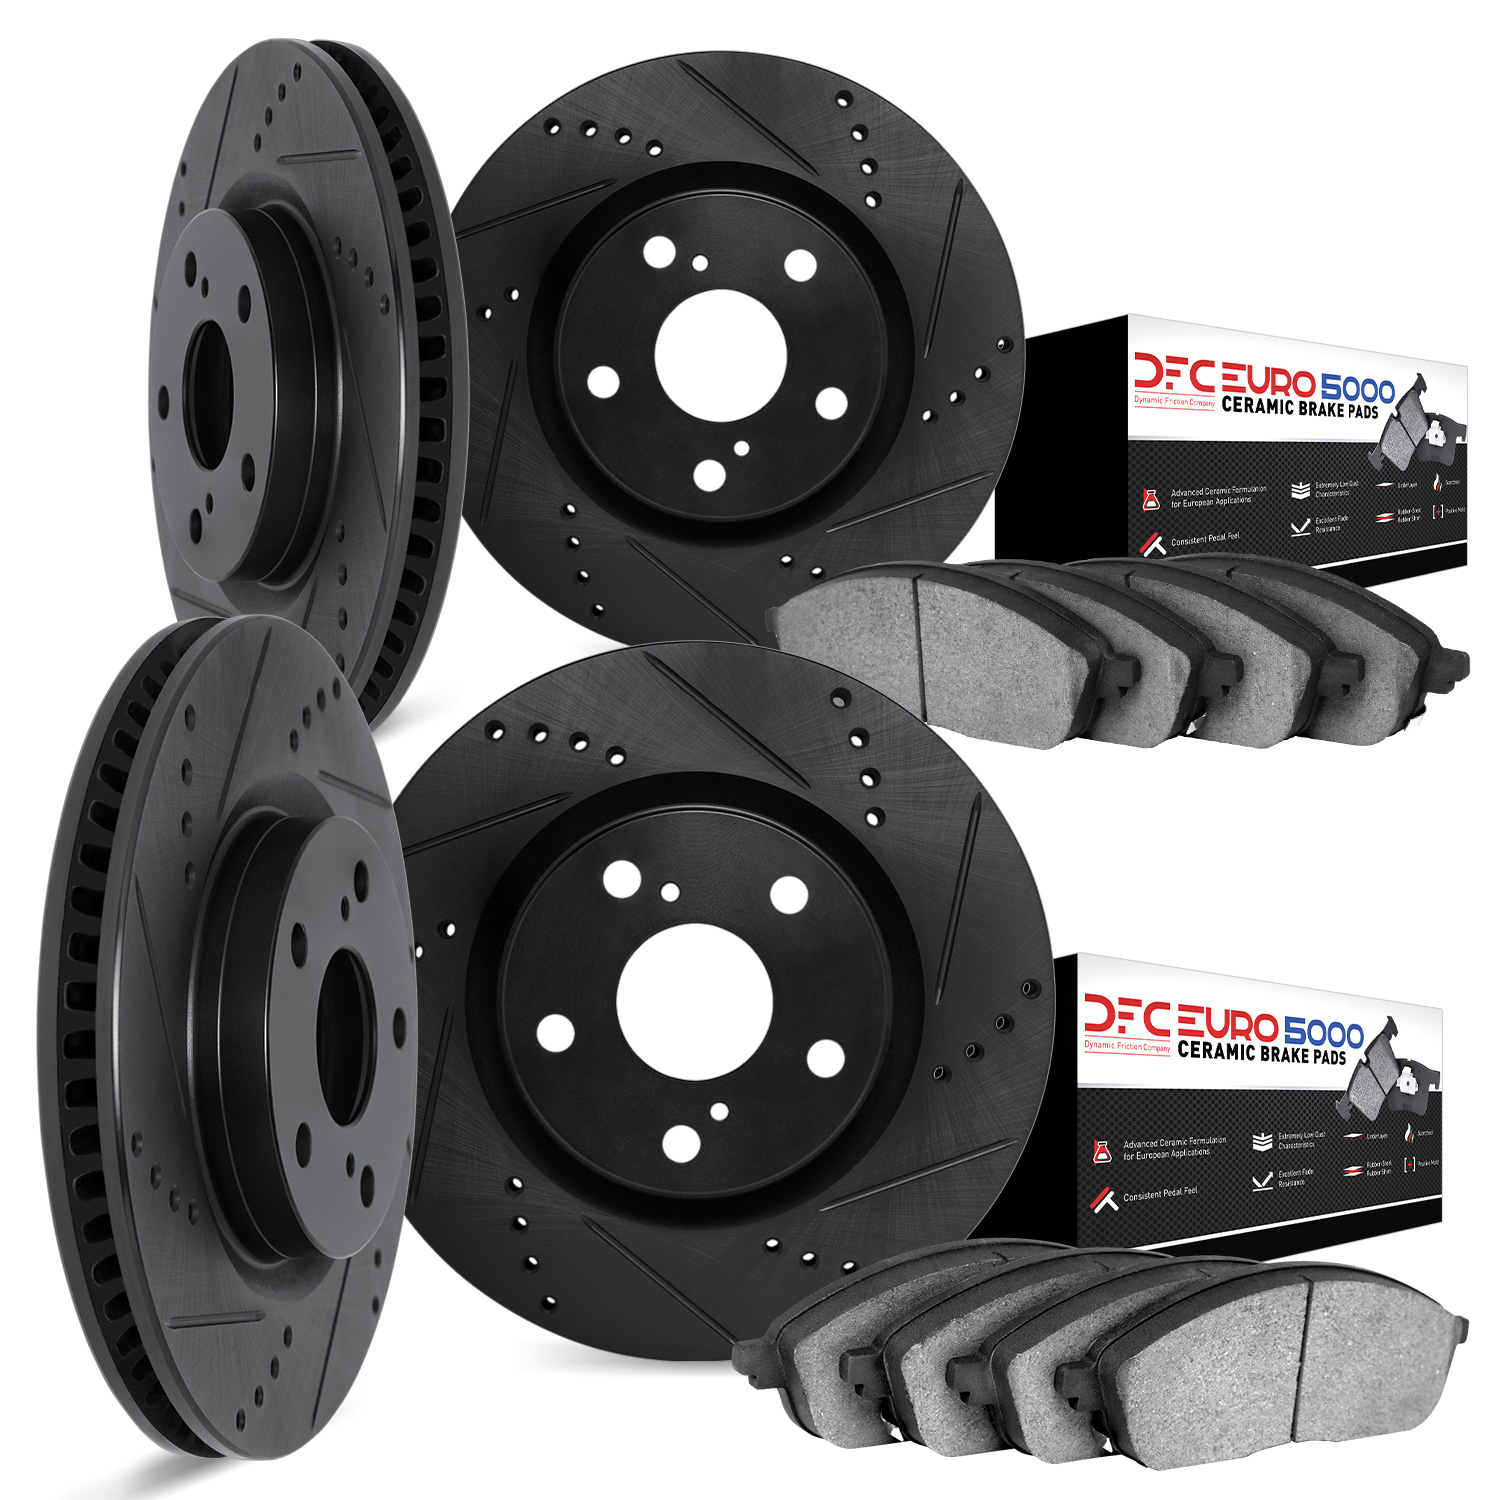 8604-27019 Drilled/Slotted Brake Rotors w/5000 Euro Ceramic Brake Pads Kit [Black], 2017-2019 Volvo, Position: Front and Rear